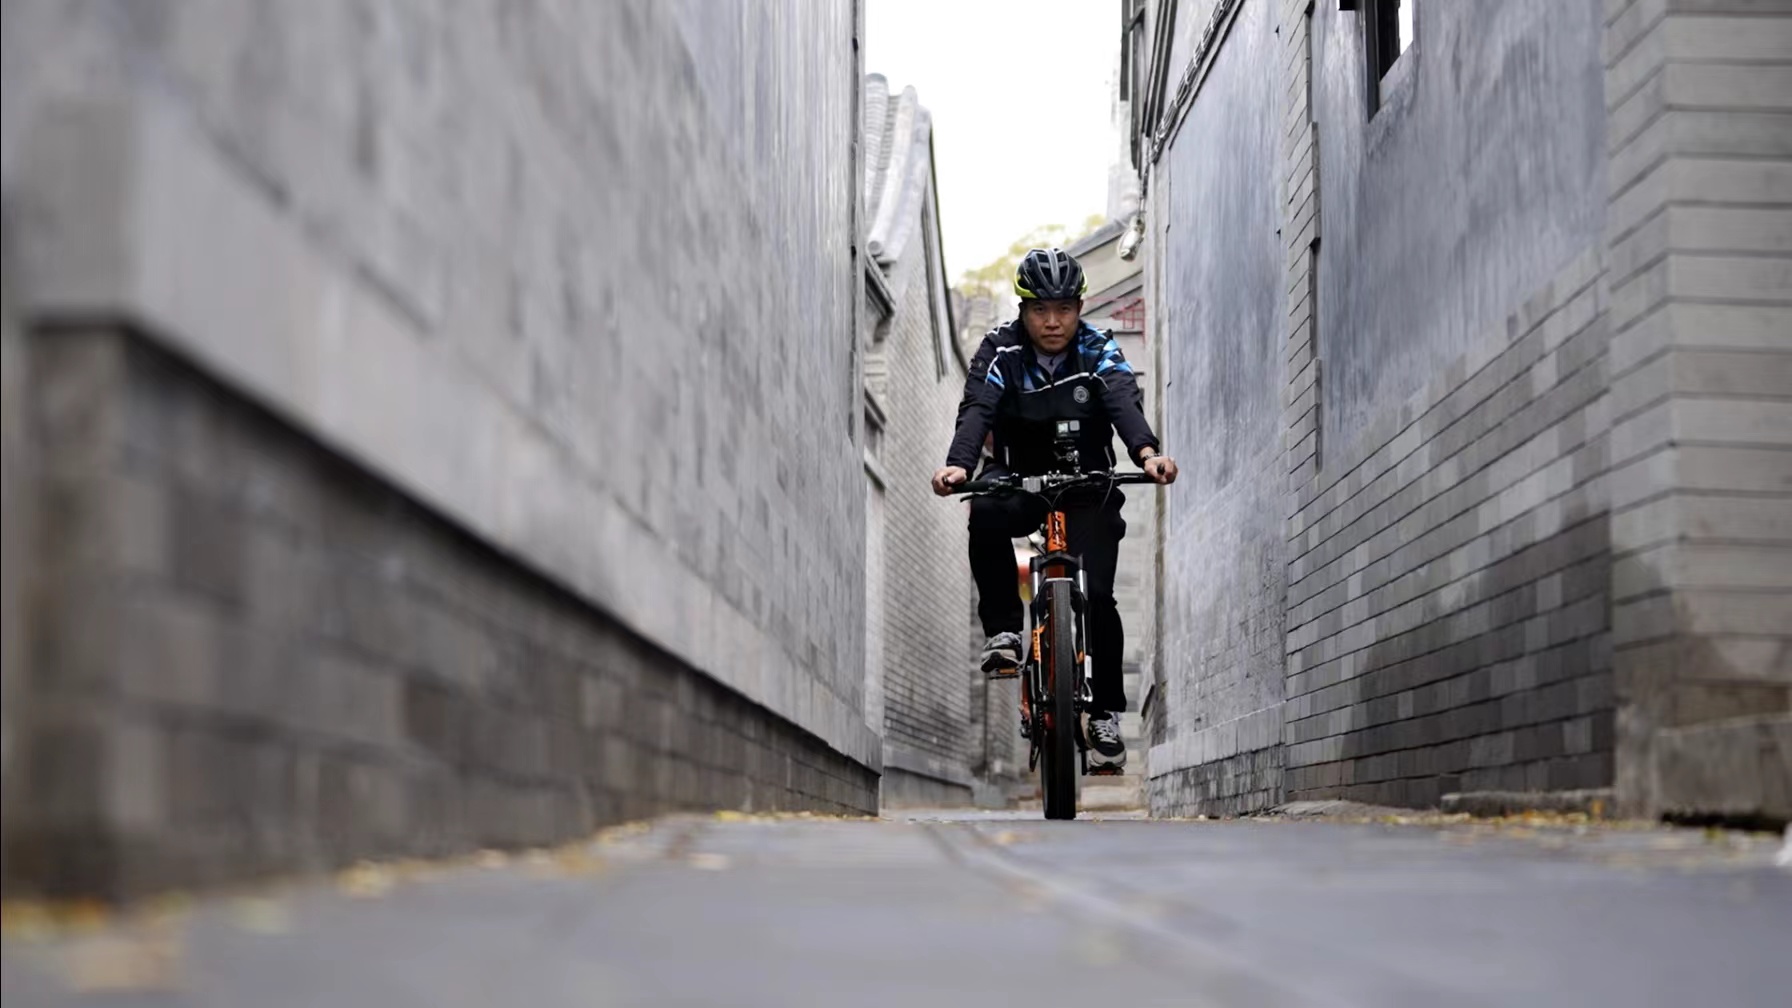 Chen Wencheng bikes in an alley, also known as a hutong, in Beijing, November 9, 2022. /CGTN